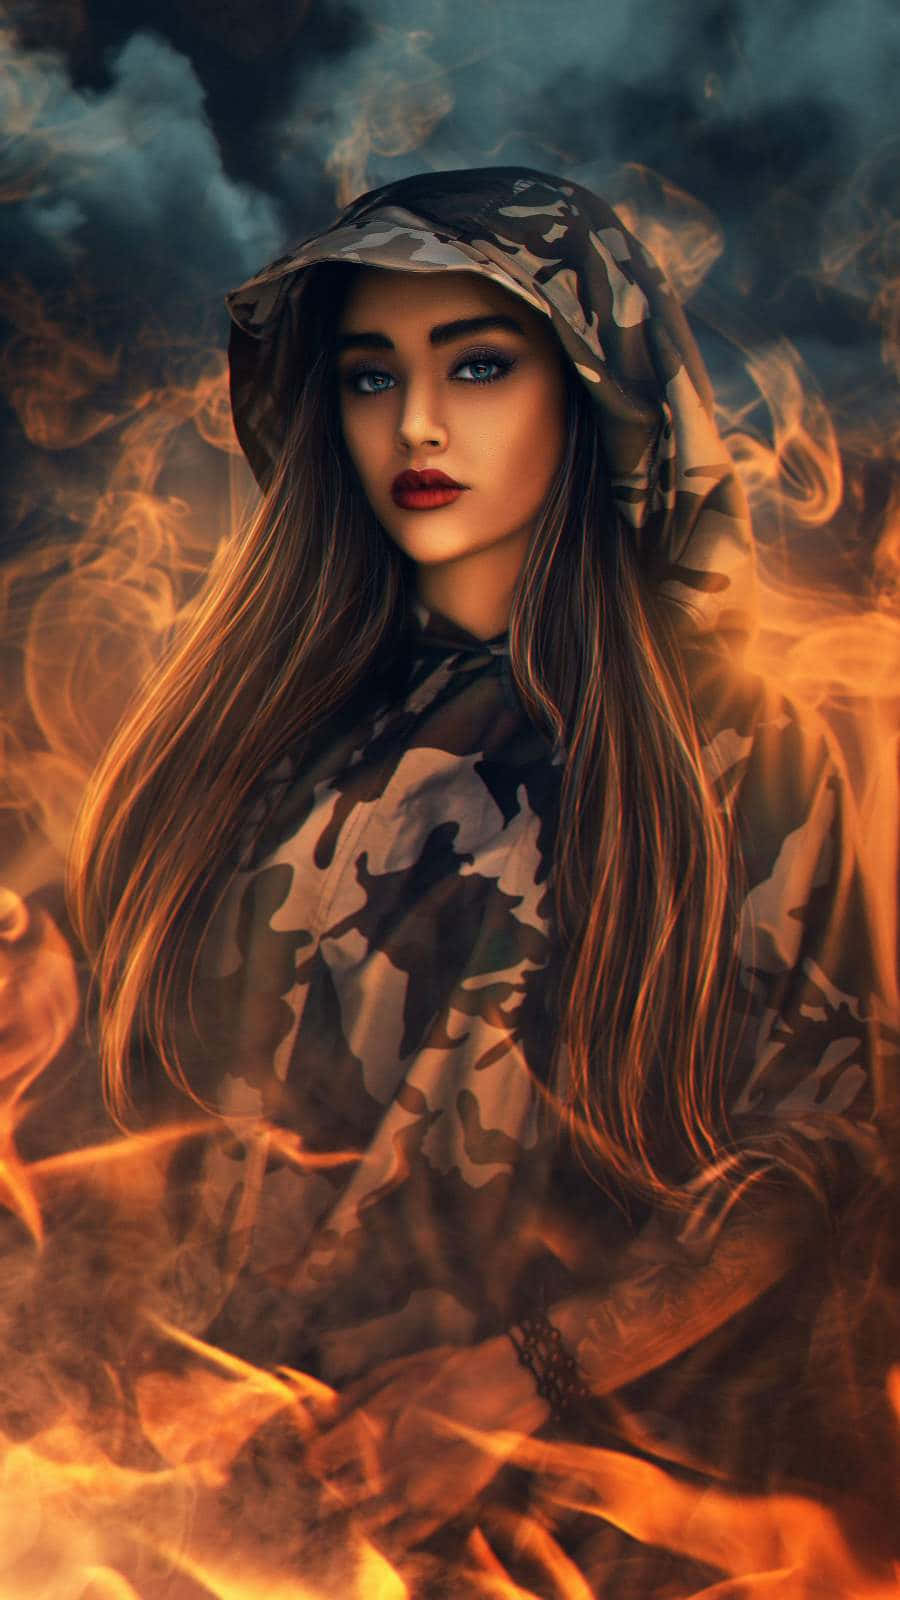 Pretty Girl Surrounded In Flames Wallpaper